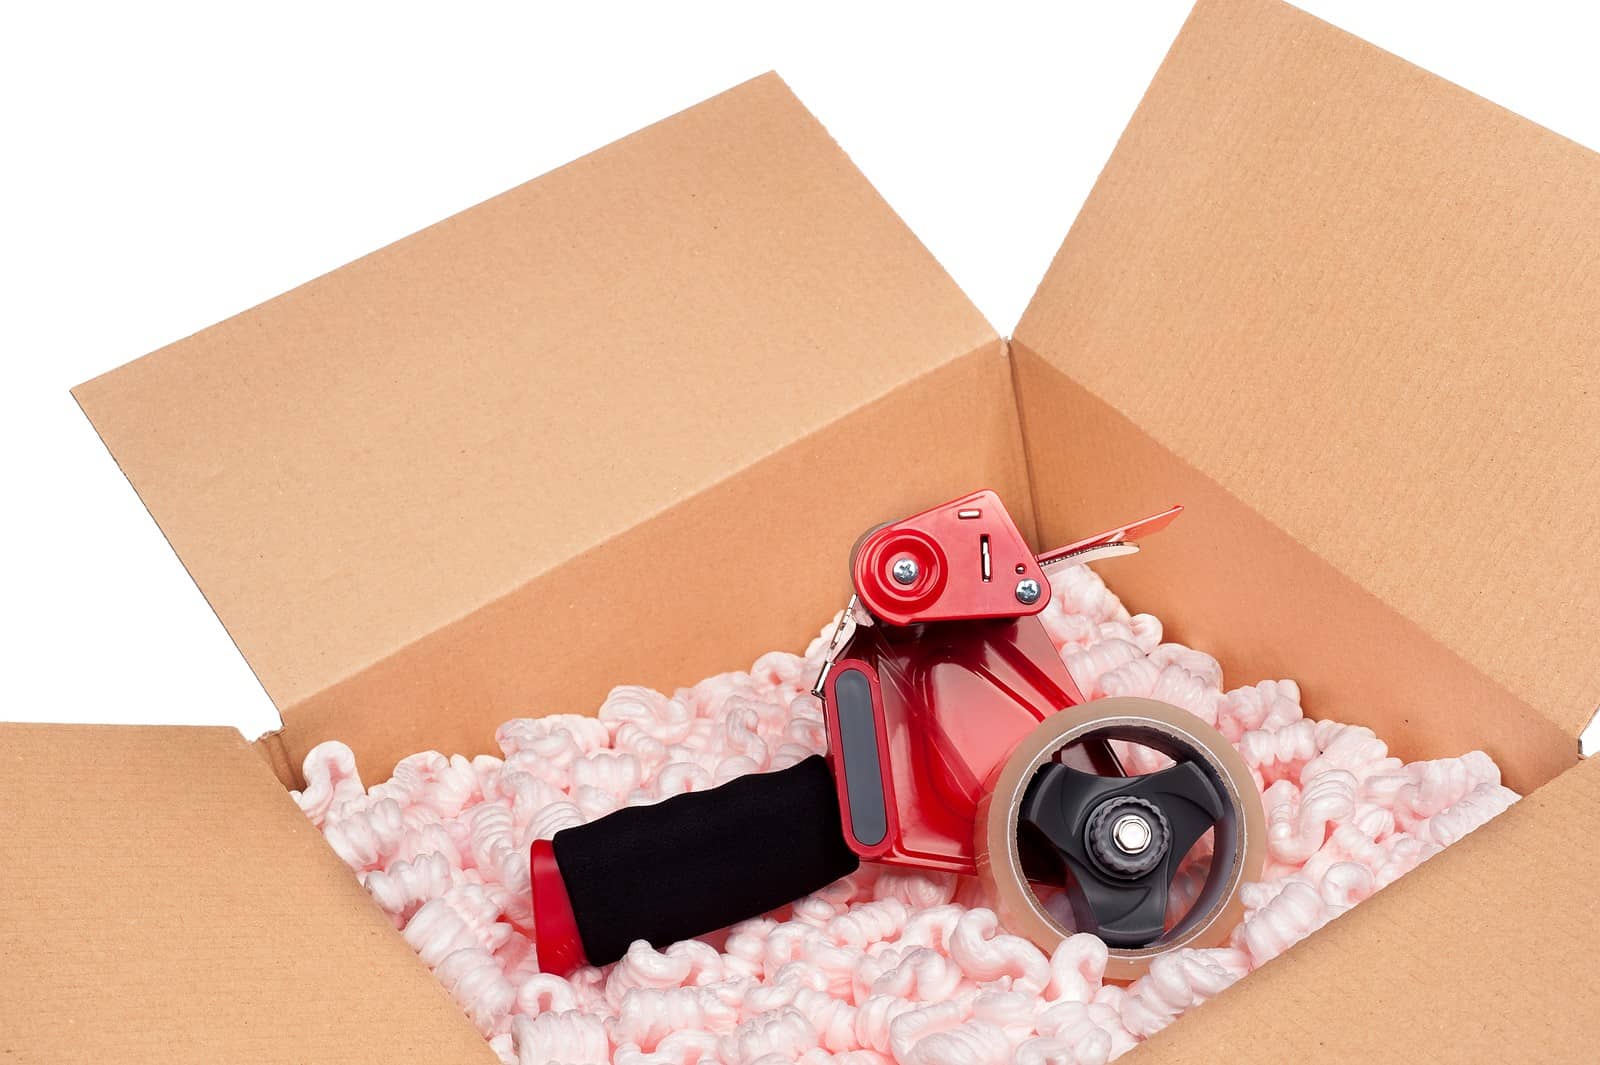 Mississauga Movers Tips How to Safely Pack Your Fragile Belongings